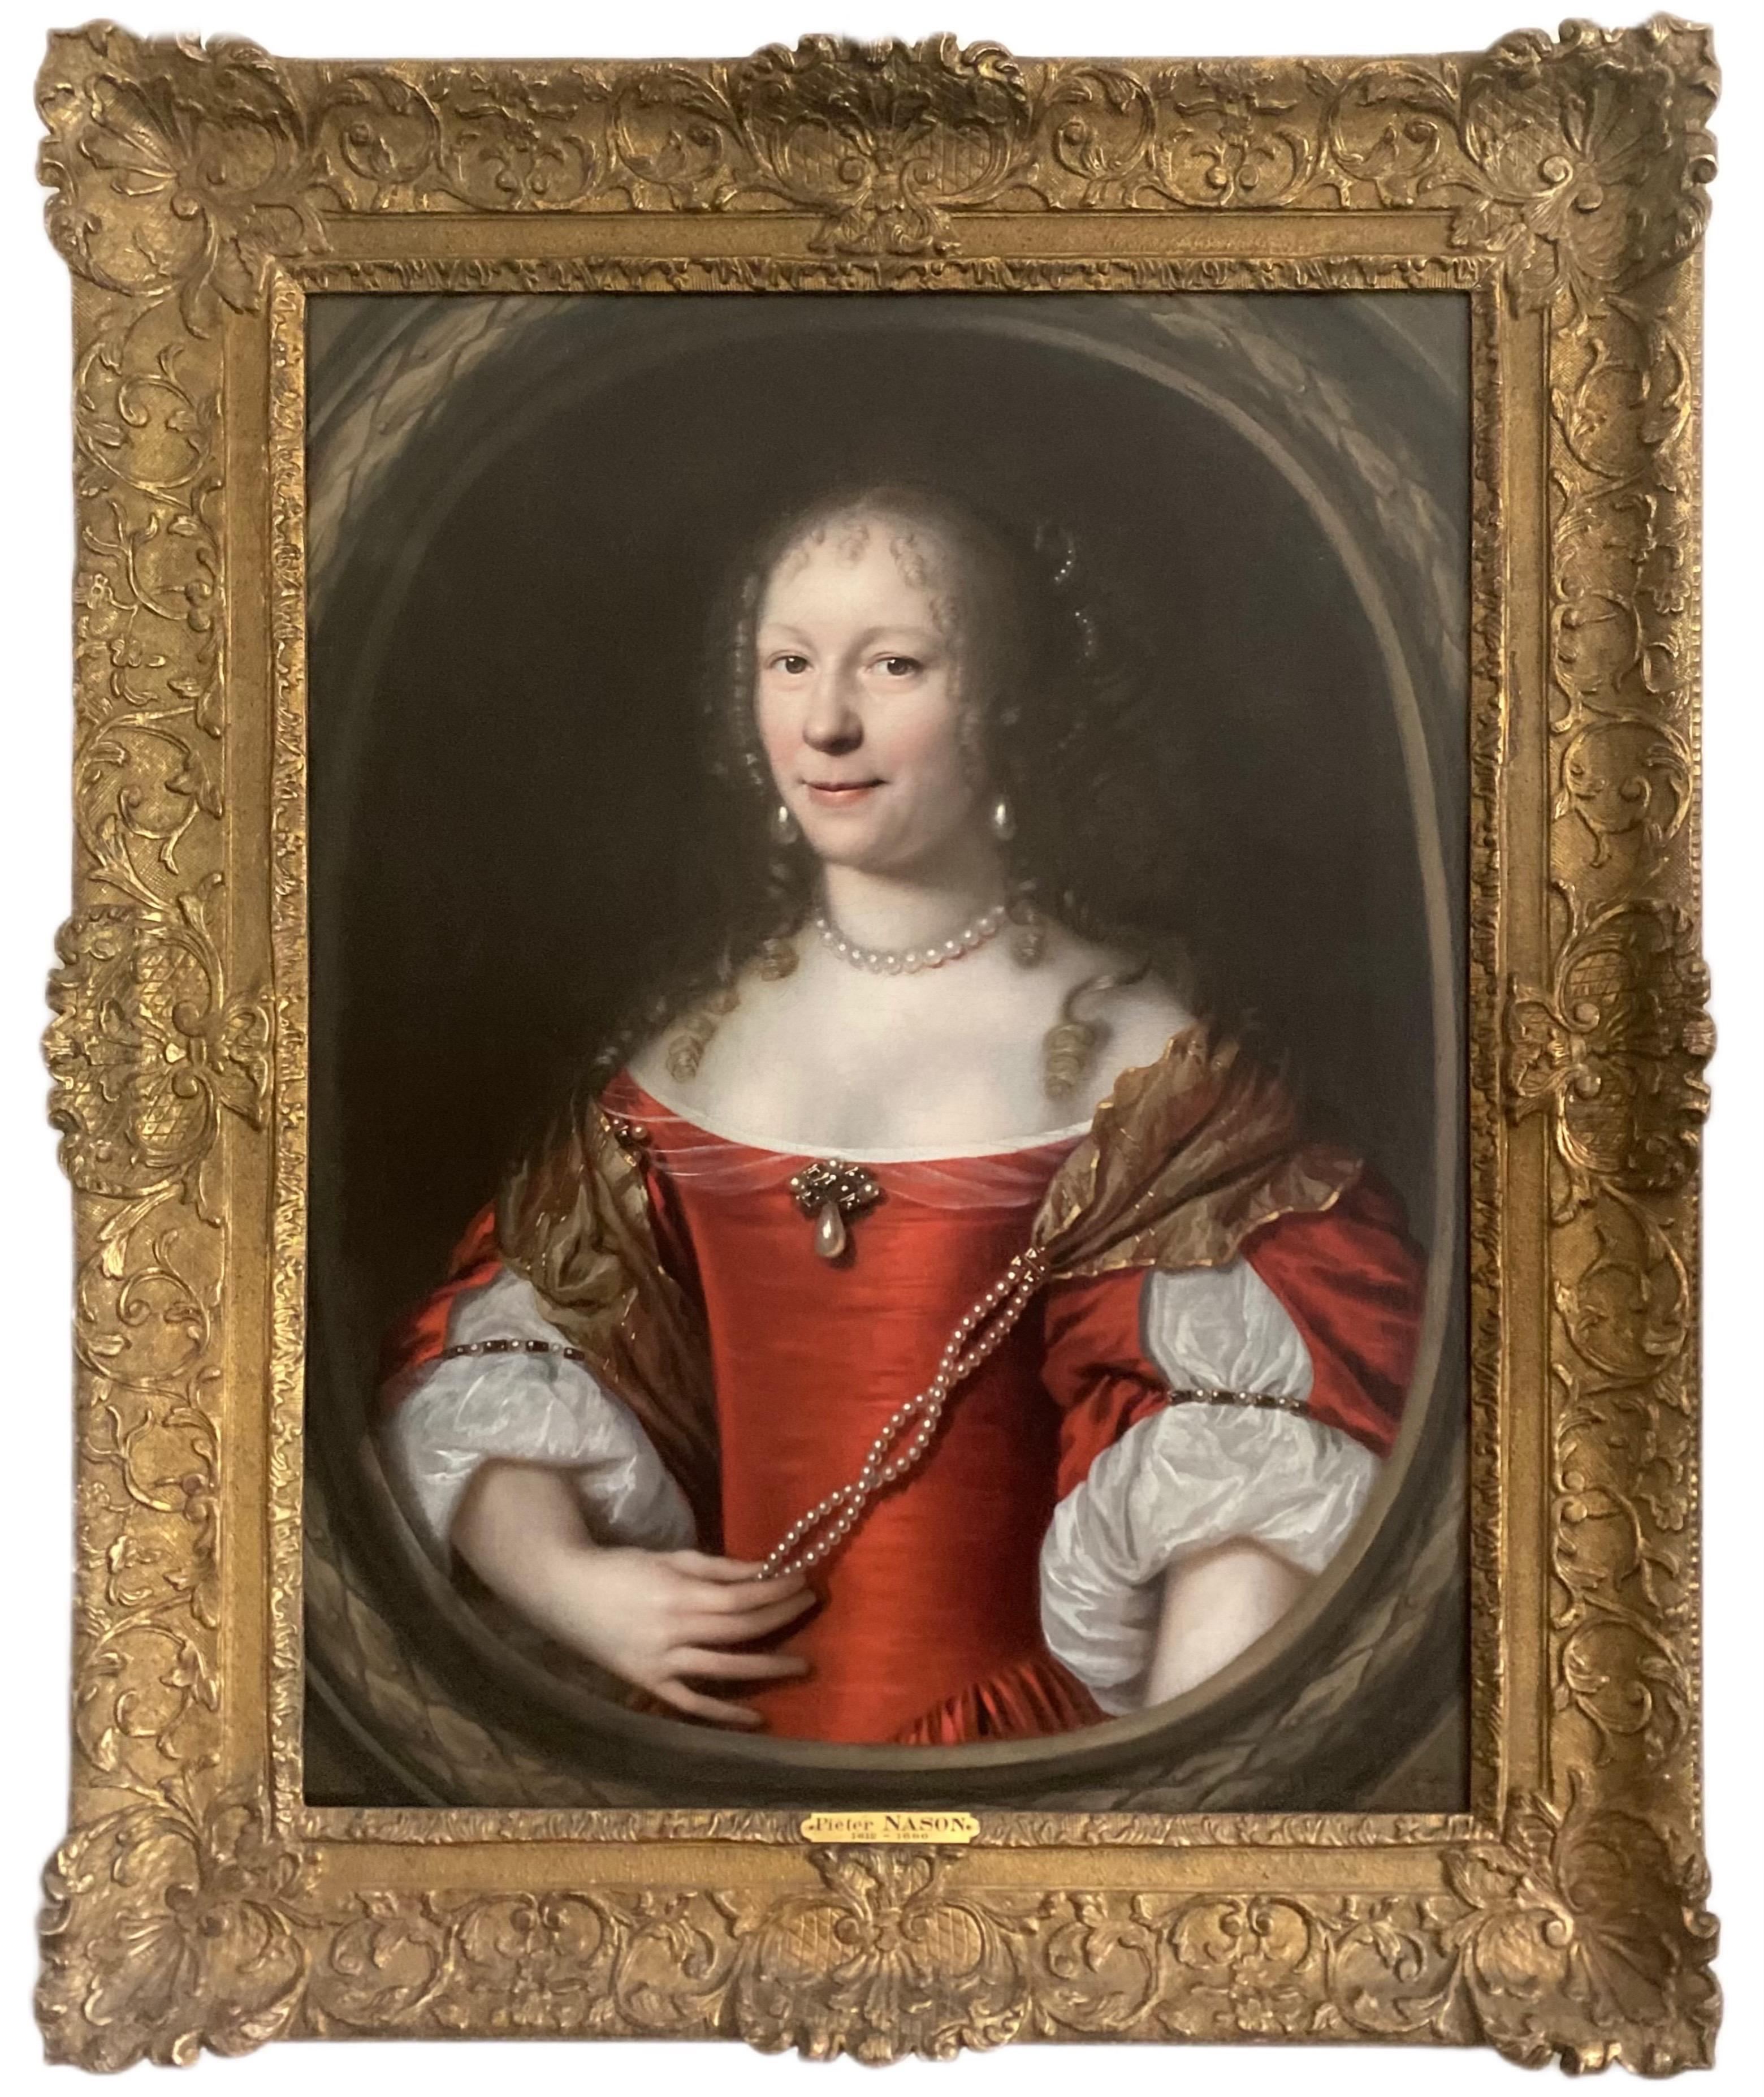 17th century Dutch portrait of a Lady in Red adorned with Pearls